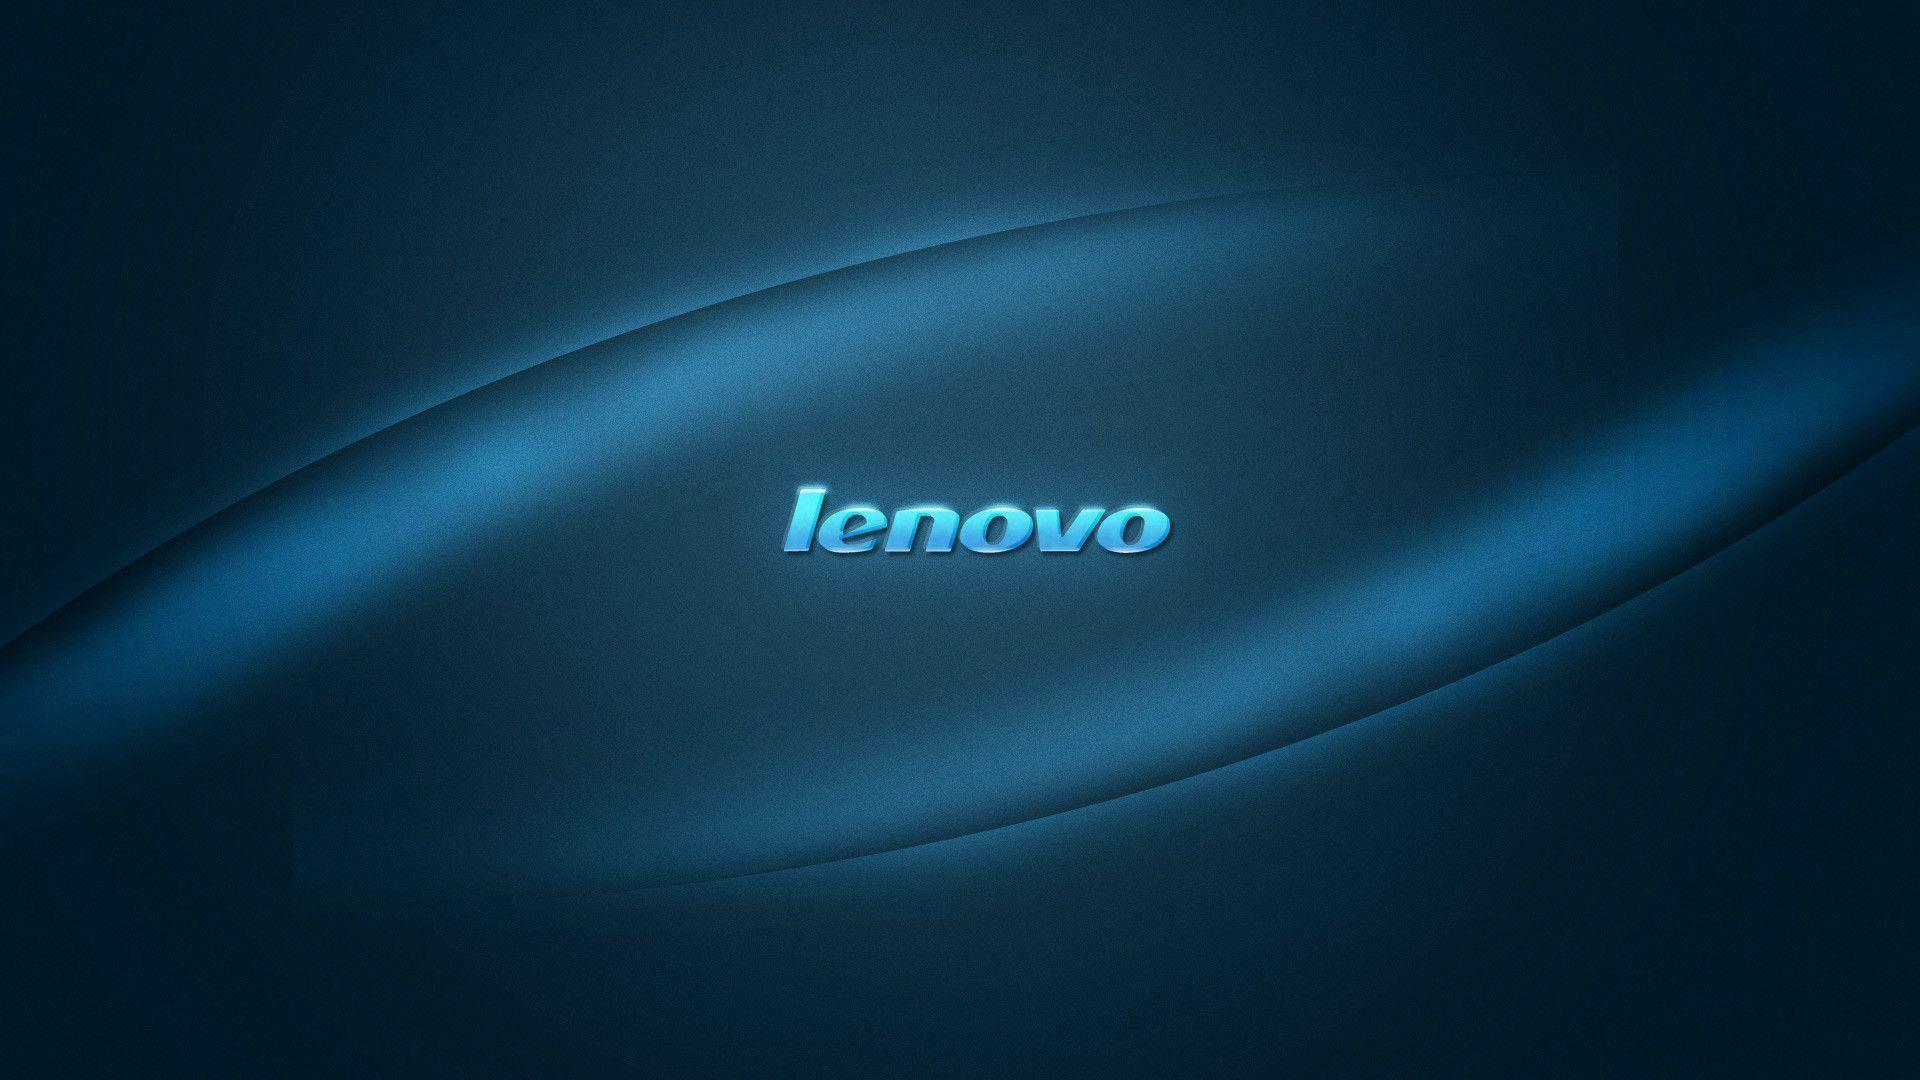 Lenovo Wallpaper Collection in HD for Download. Lenovo